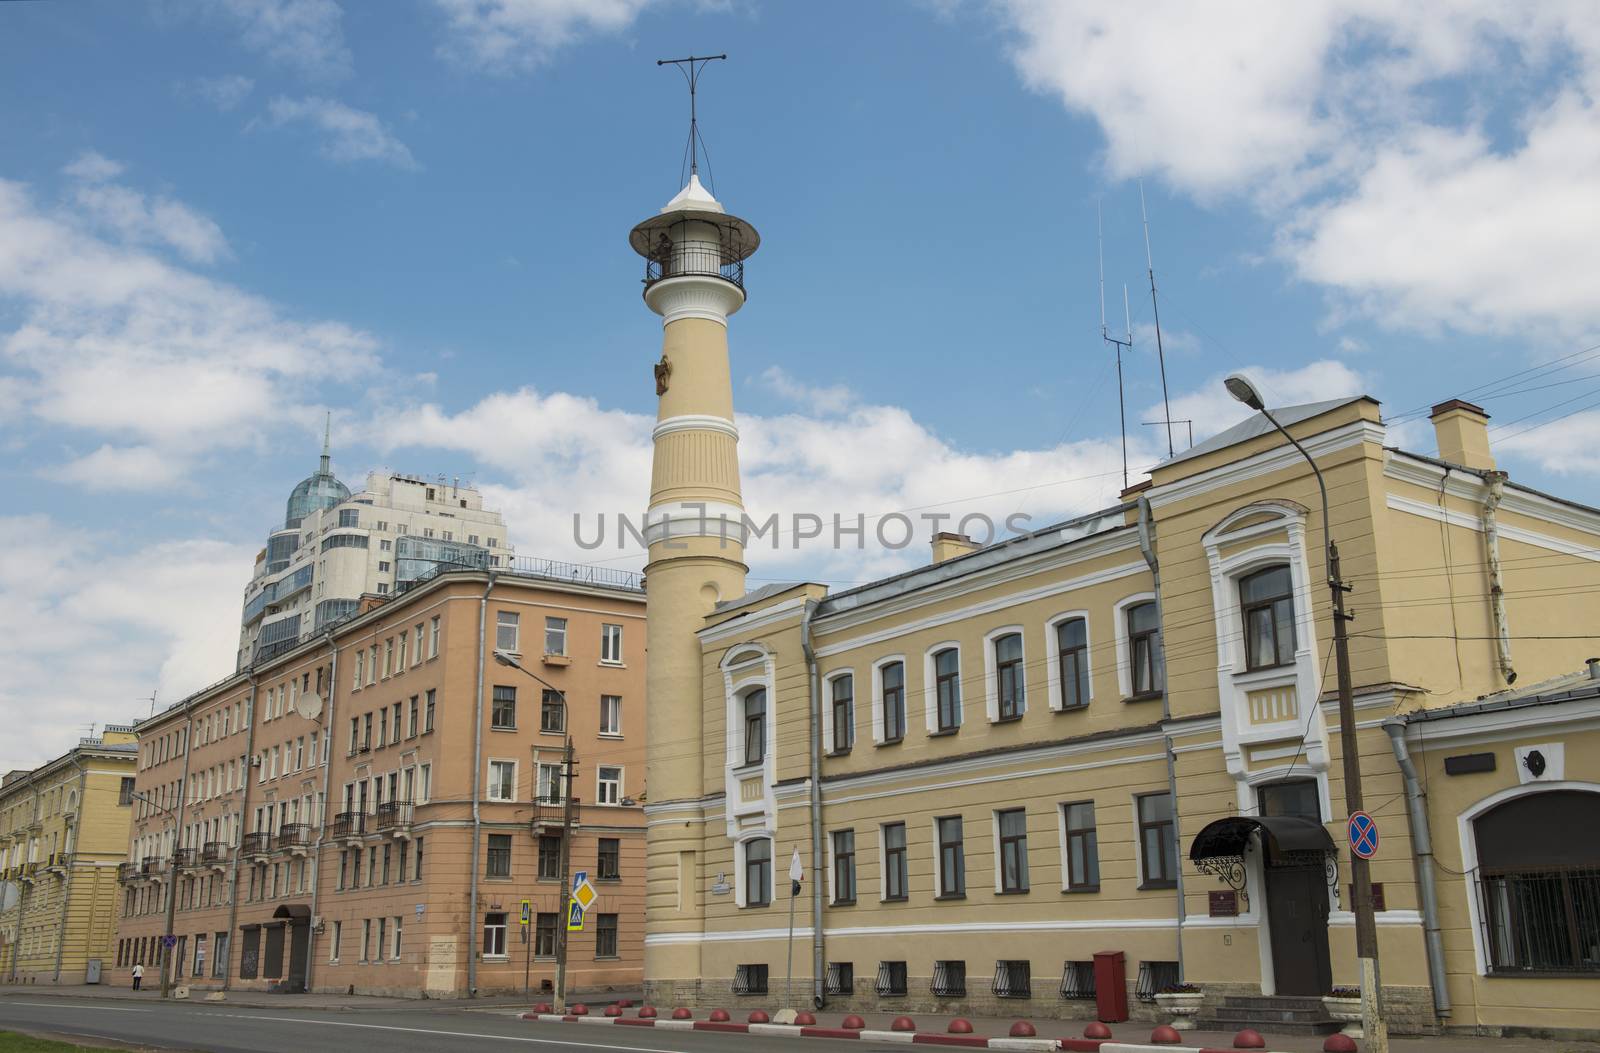 Fire tower in Sankt Petersburg by Alenmax